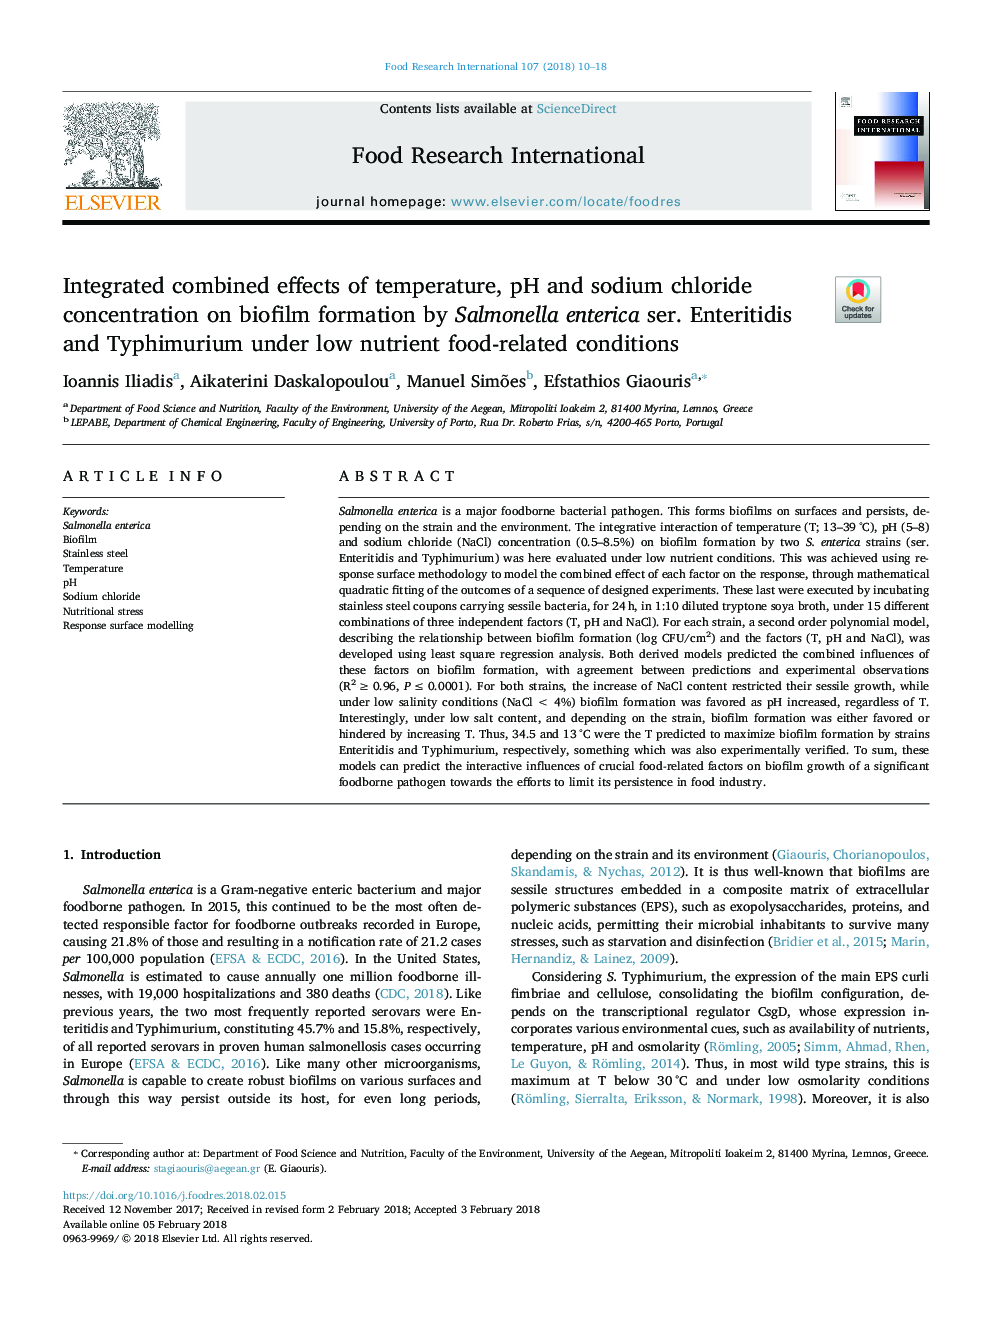 Integrated combined effects of temperature, pH and sodium chloride concentration on biofilm formation by Salmonella enterica ser. Enteritidis and Typhimurium under low nutrient food-related conditions